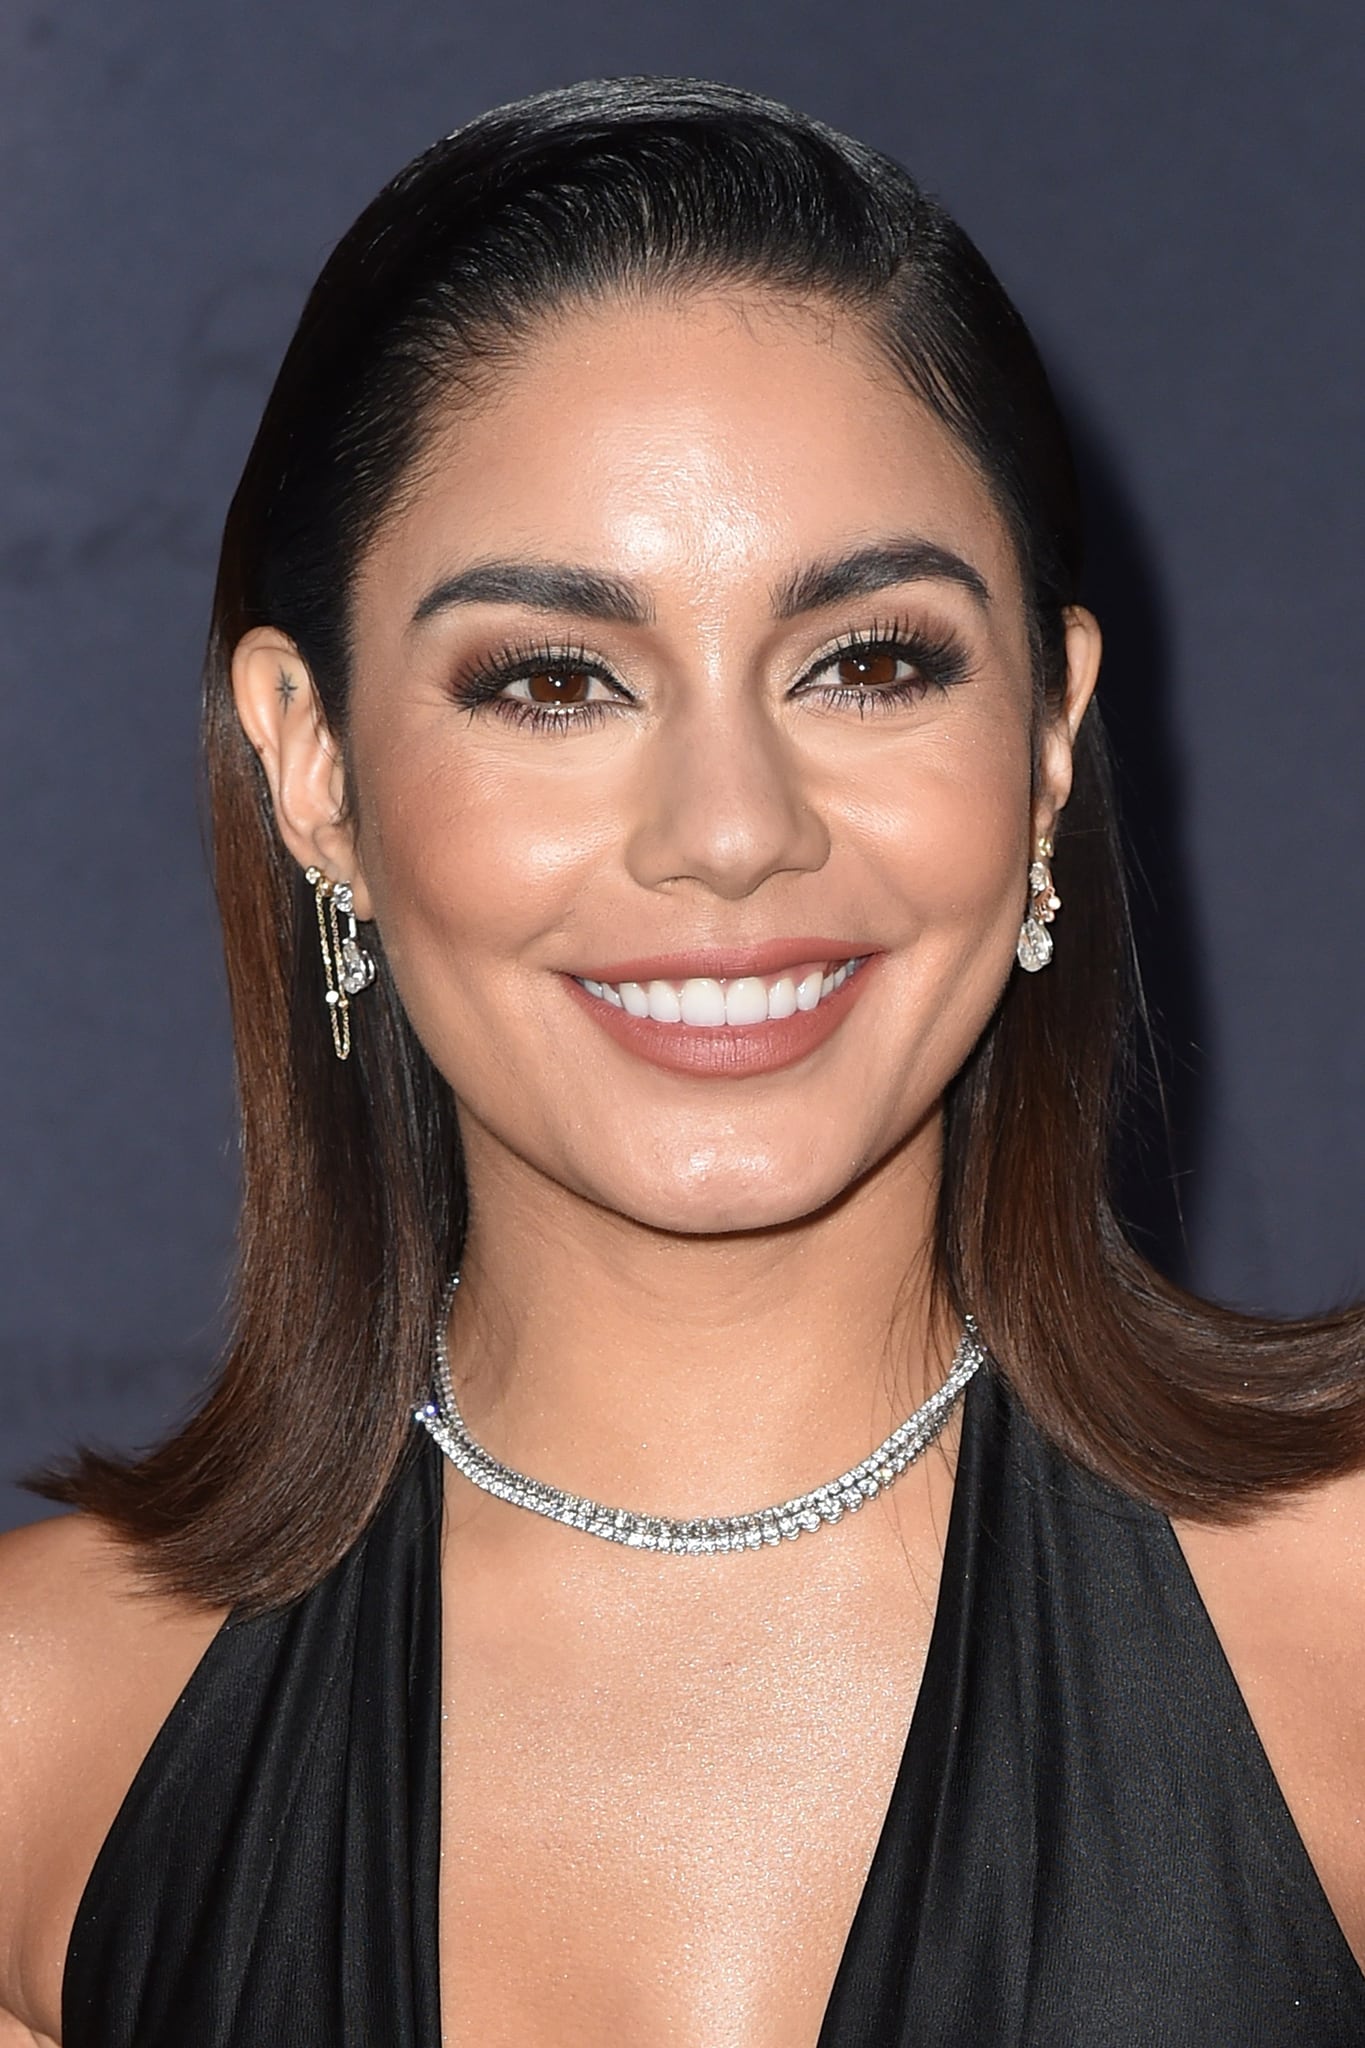 Vanessa Hudgens wears smokey eye-makeup with mascara and a slick side-parted 'do with flared-out ends